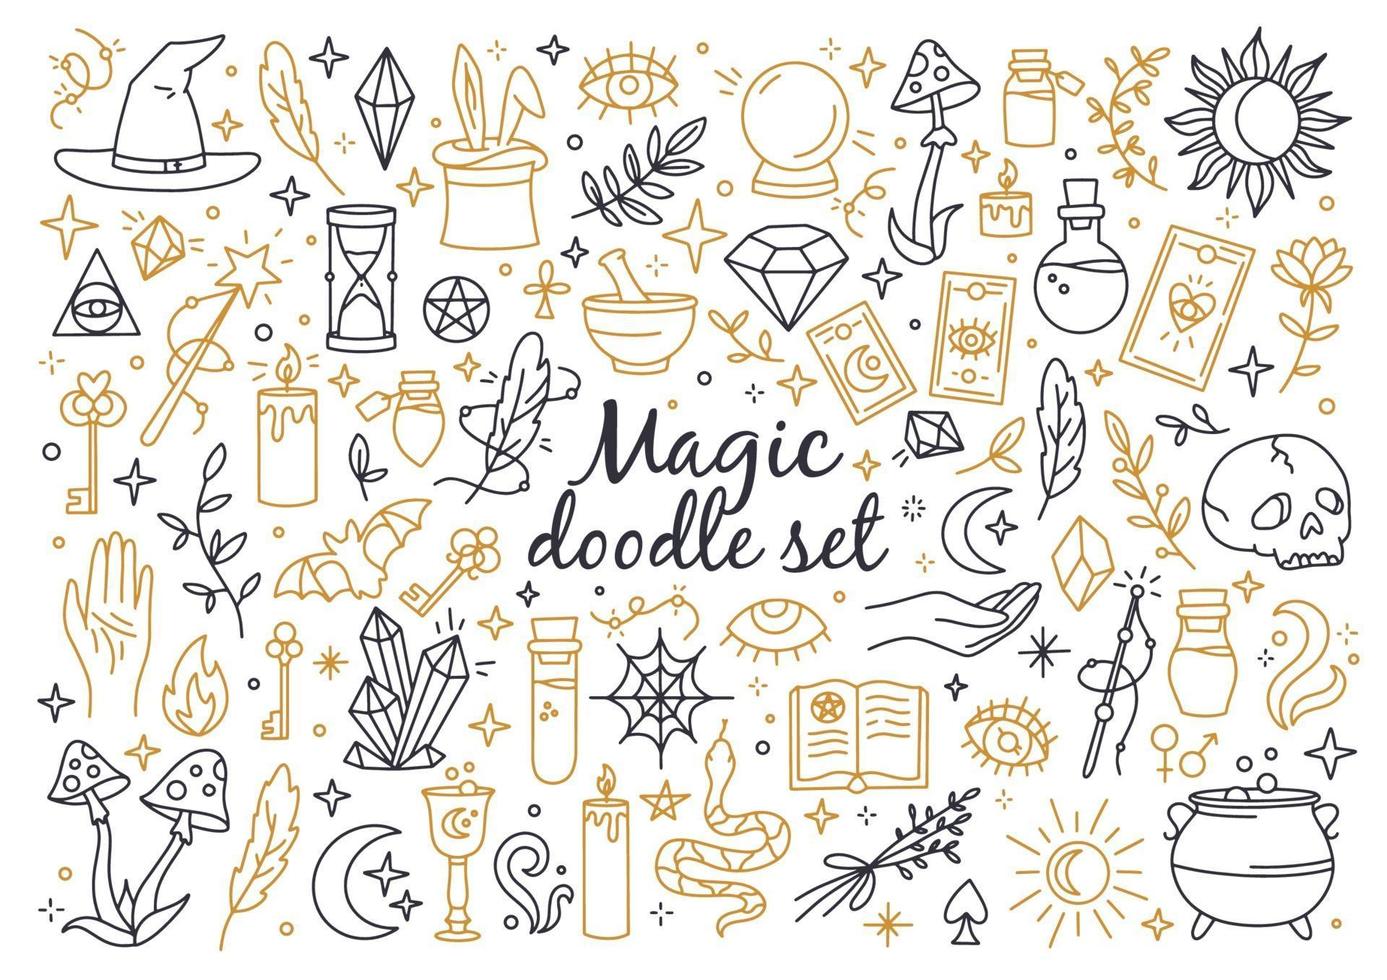 A magical and witchcraft set of doodle style icons vector